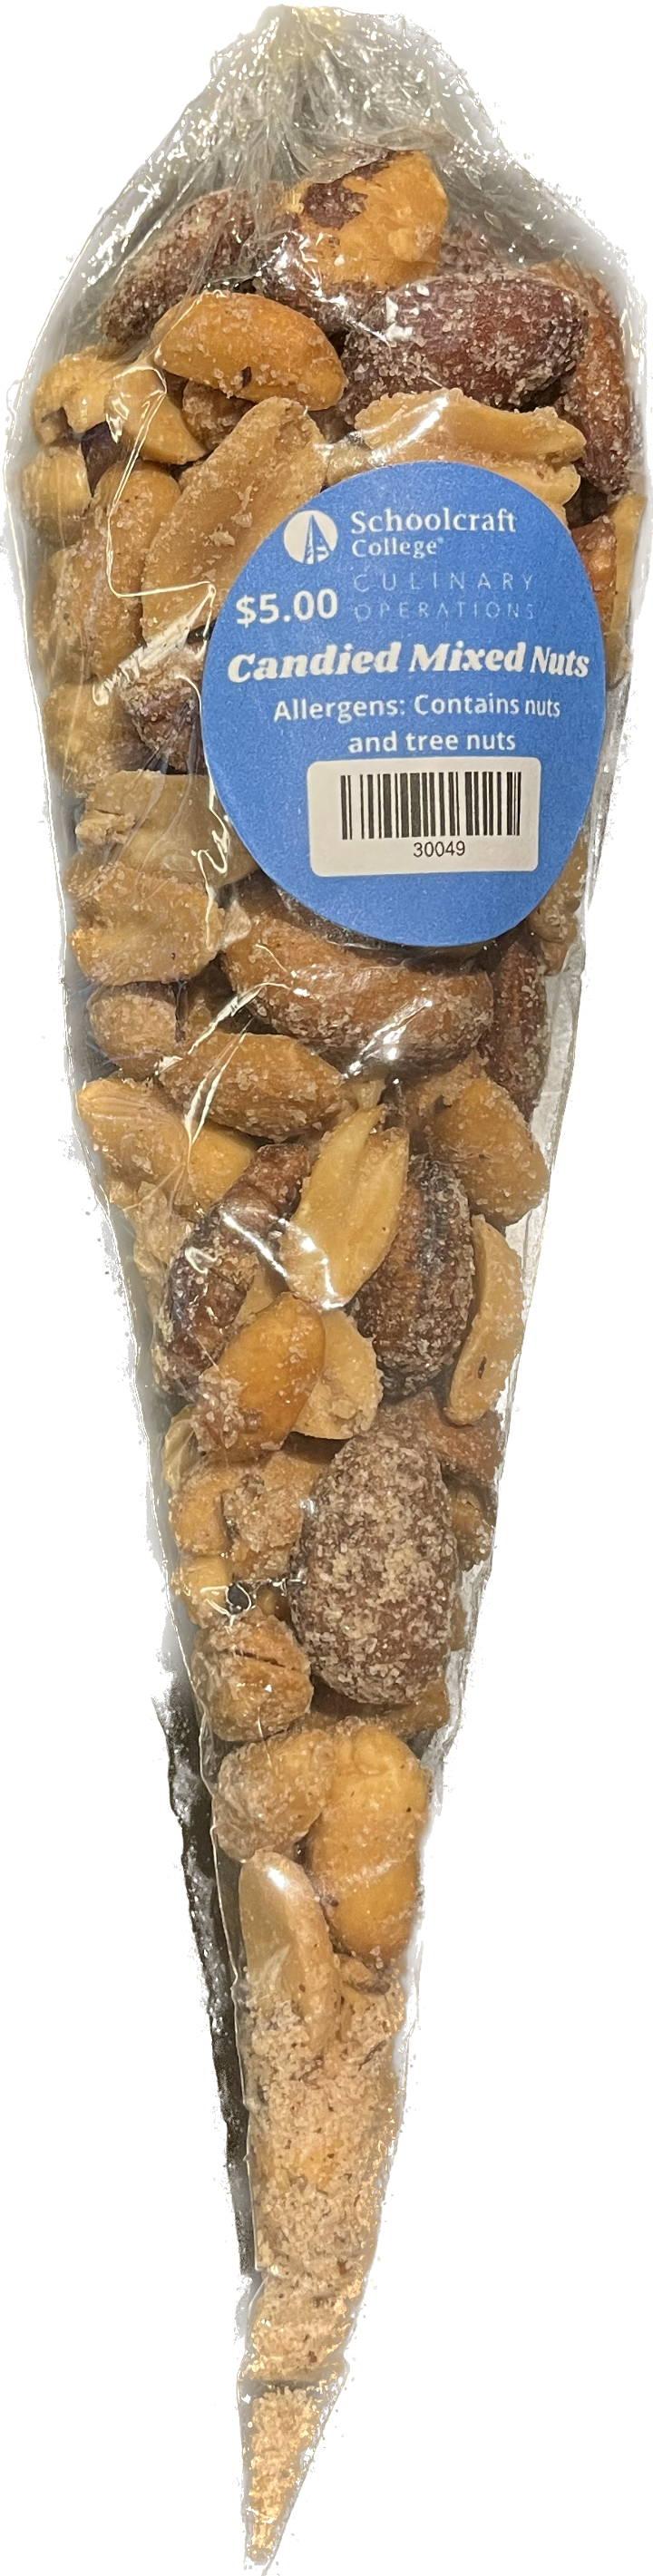 Candied Nut Mix